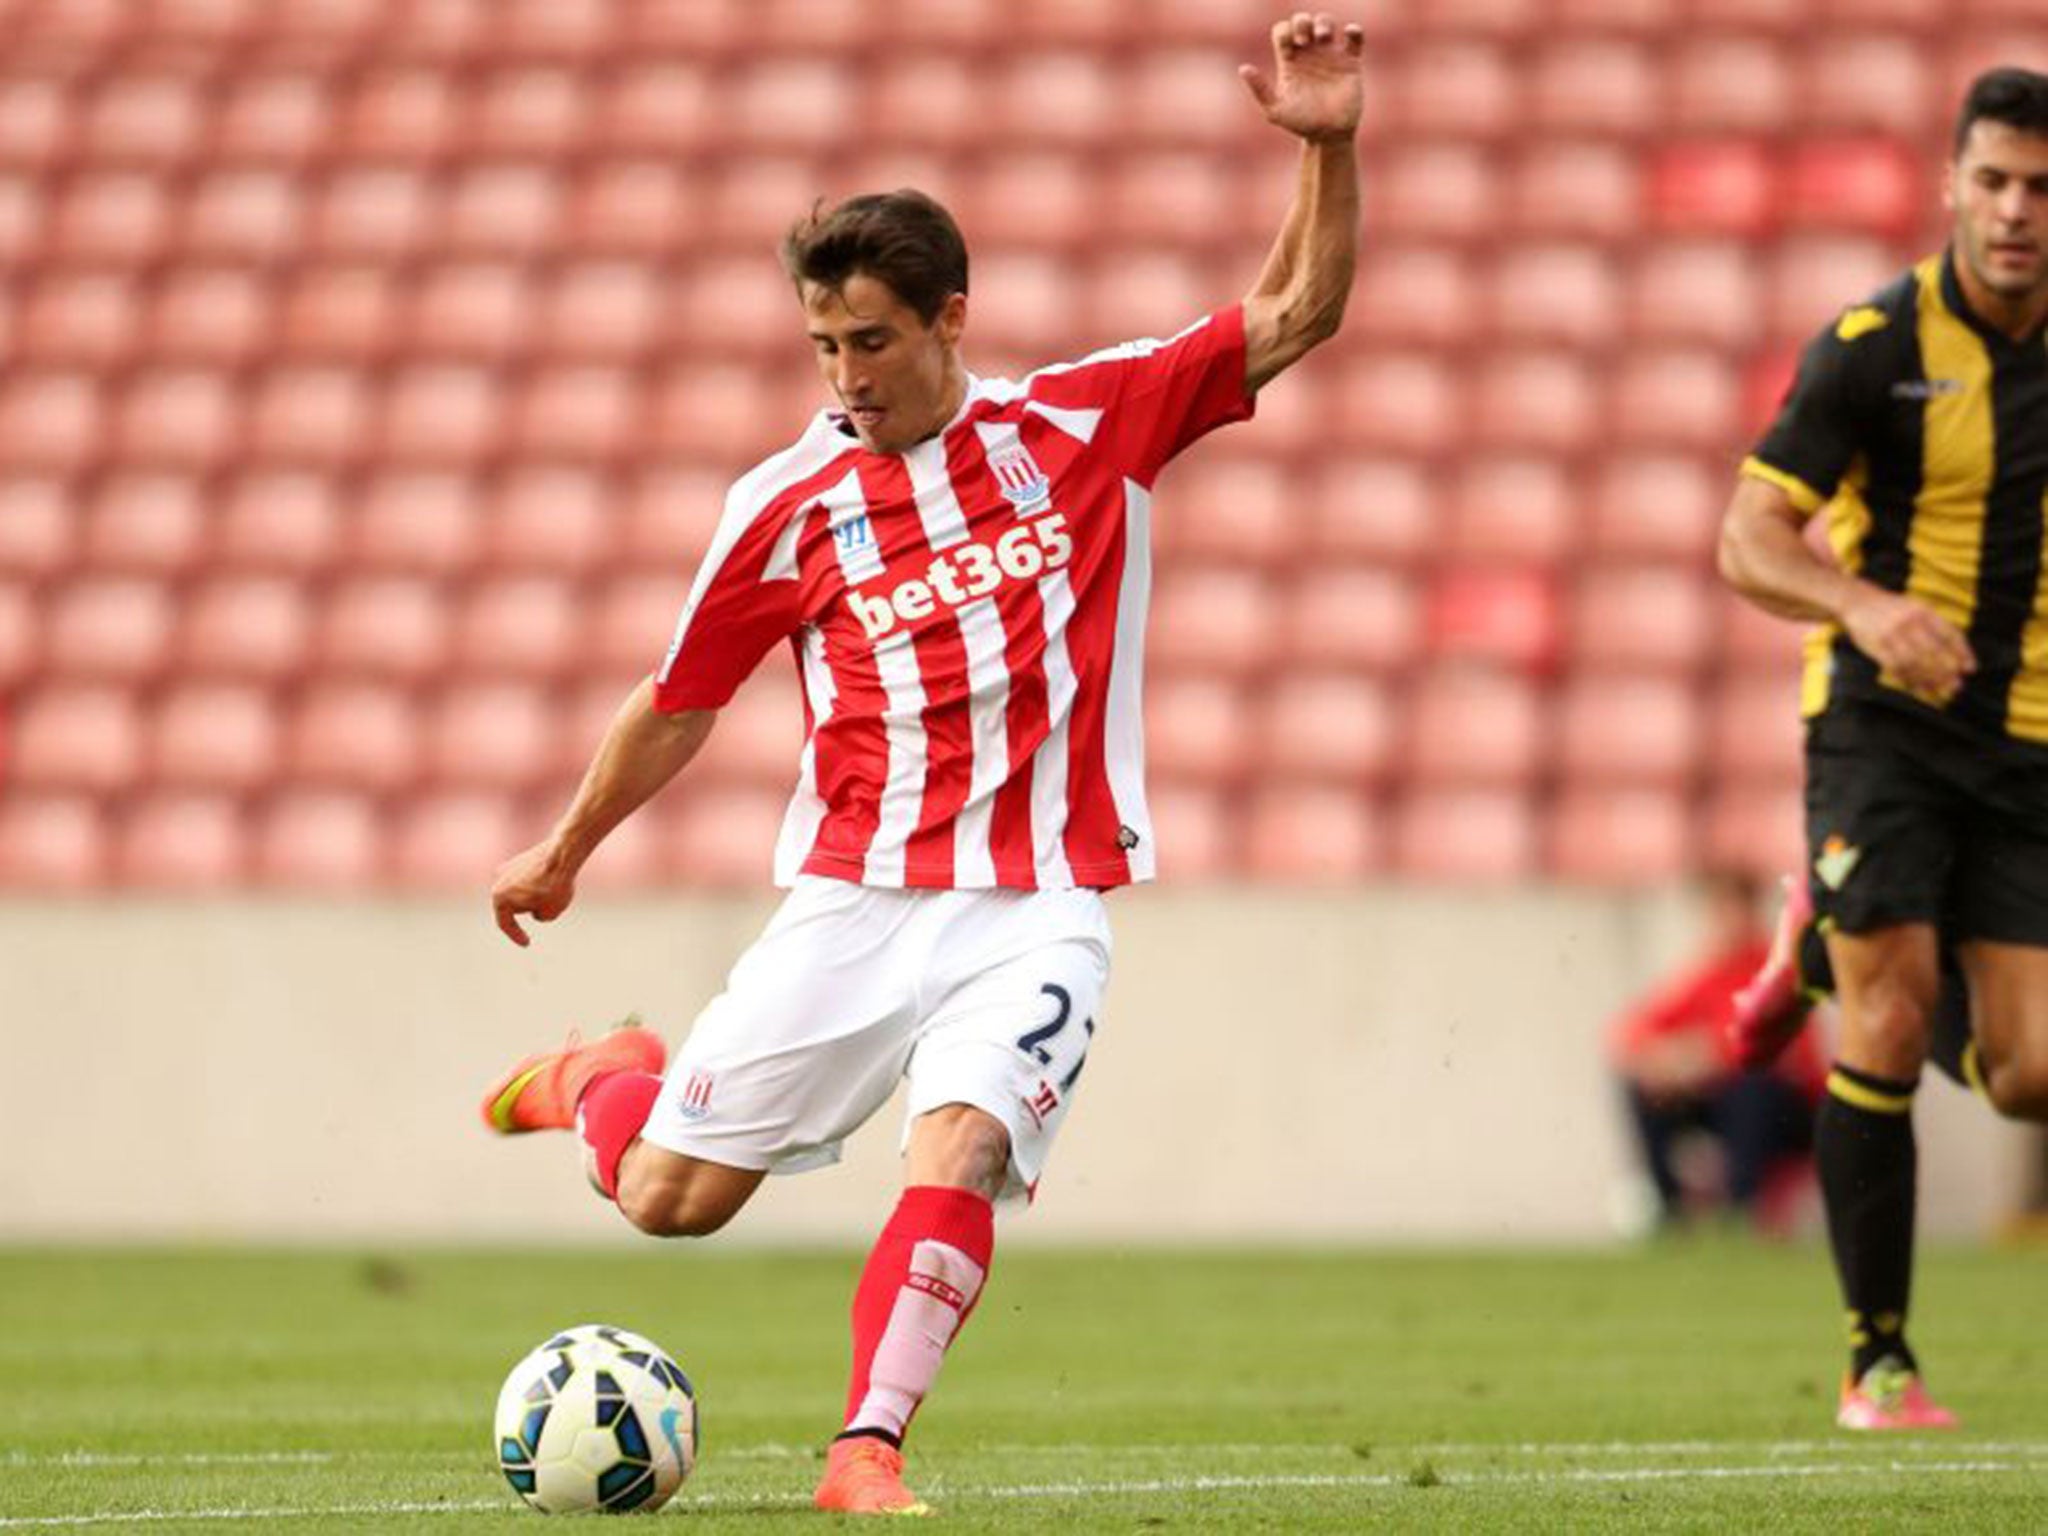 Bojan Krkic scored another good goal for Stoke City - he now has three in three matches